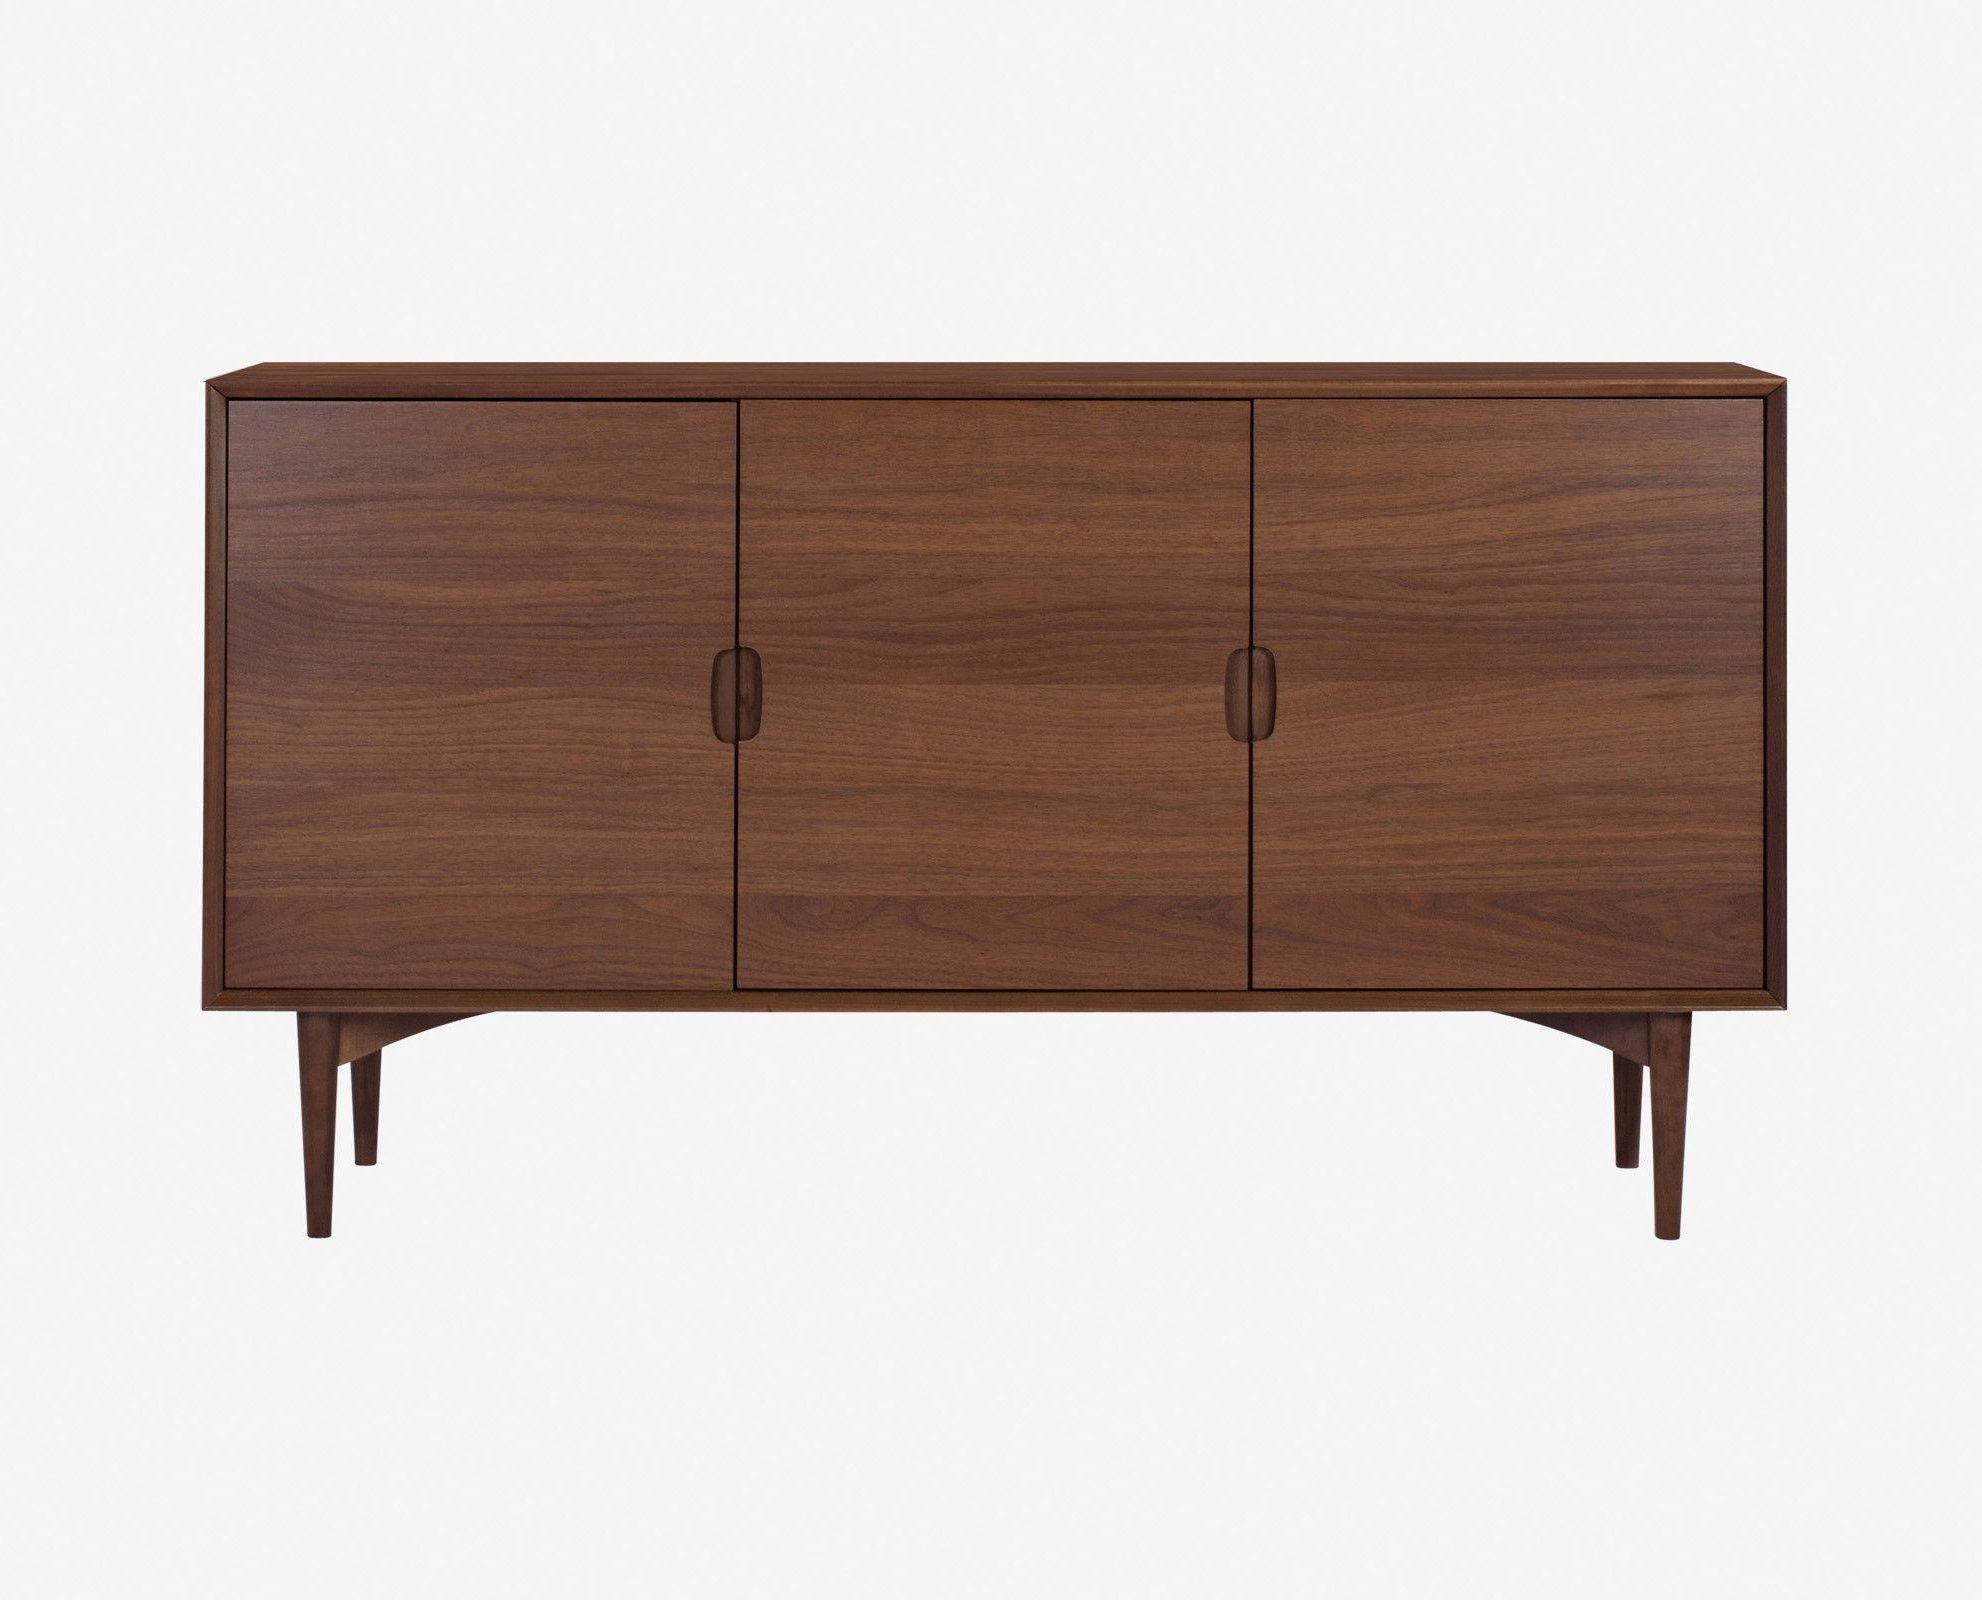 Juneau Sideboard In 2019 | Dining Room Decor | Sideboard Intended For Stella Sideboards (View 4 of 20)